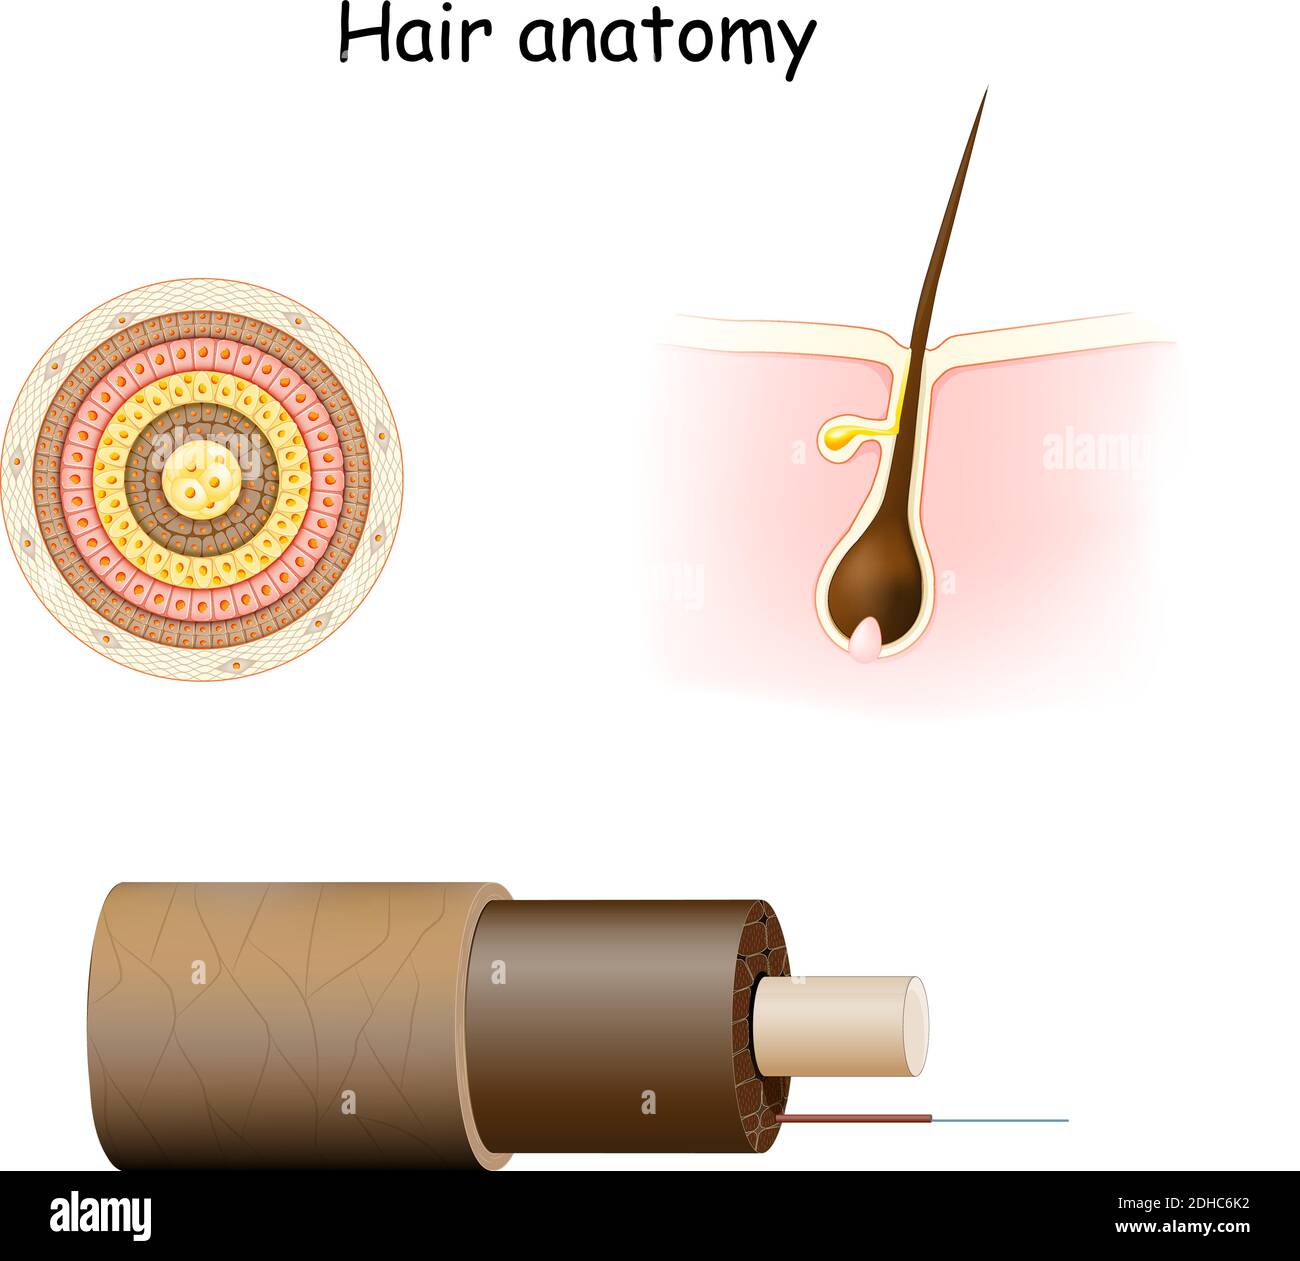 Pigmentation of the hair shaft and differentiation of the root sheath   Download Scientific Diagram